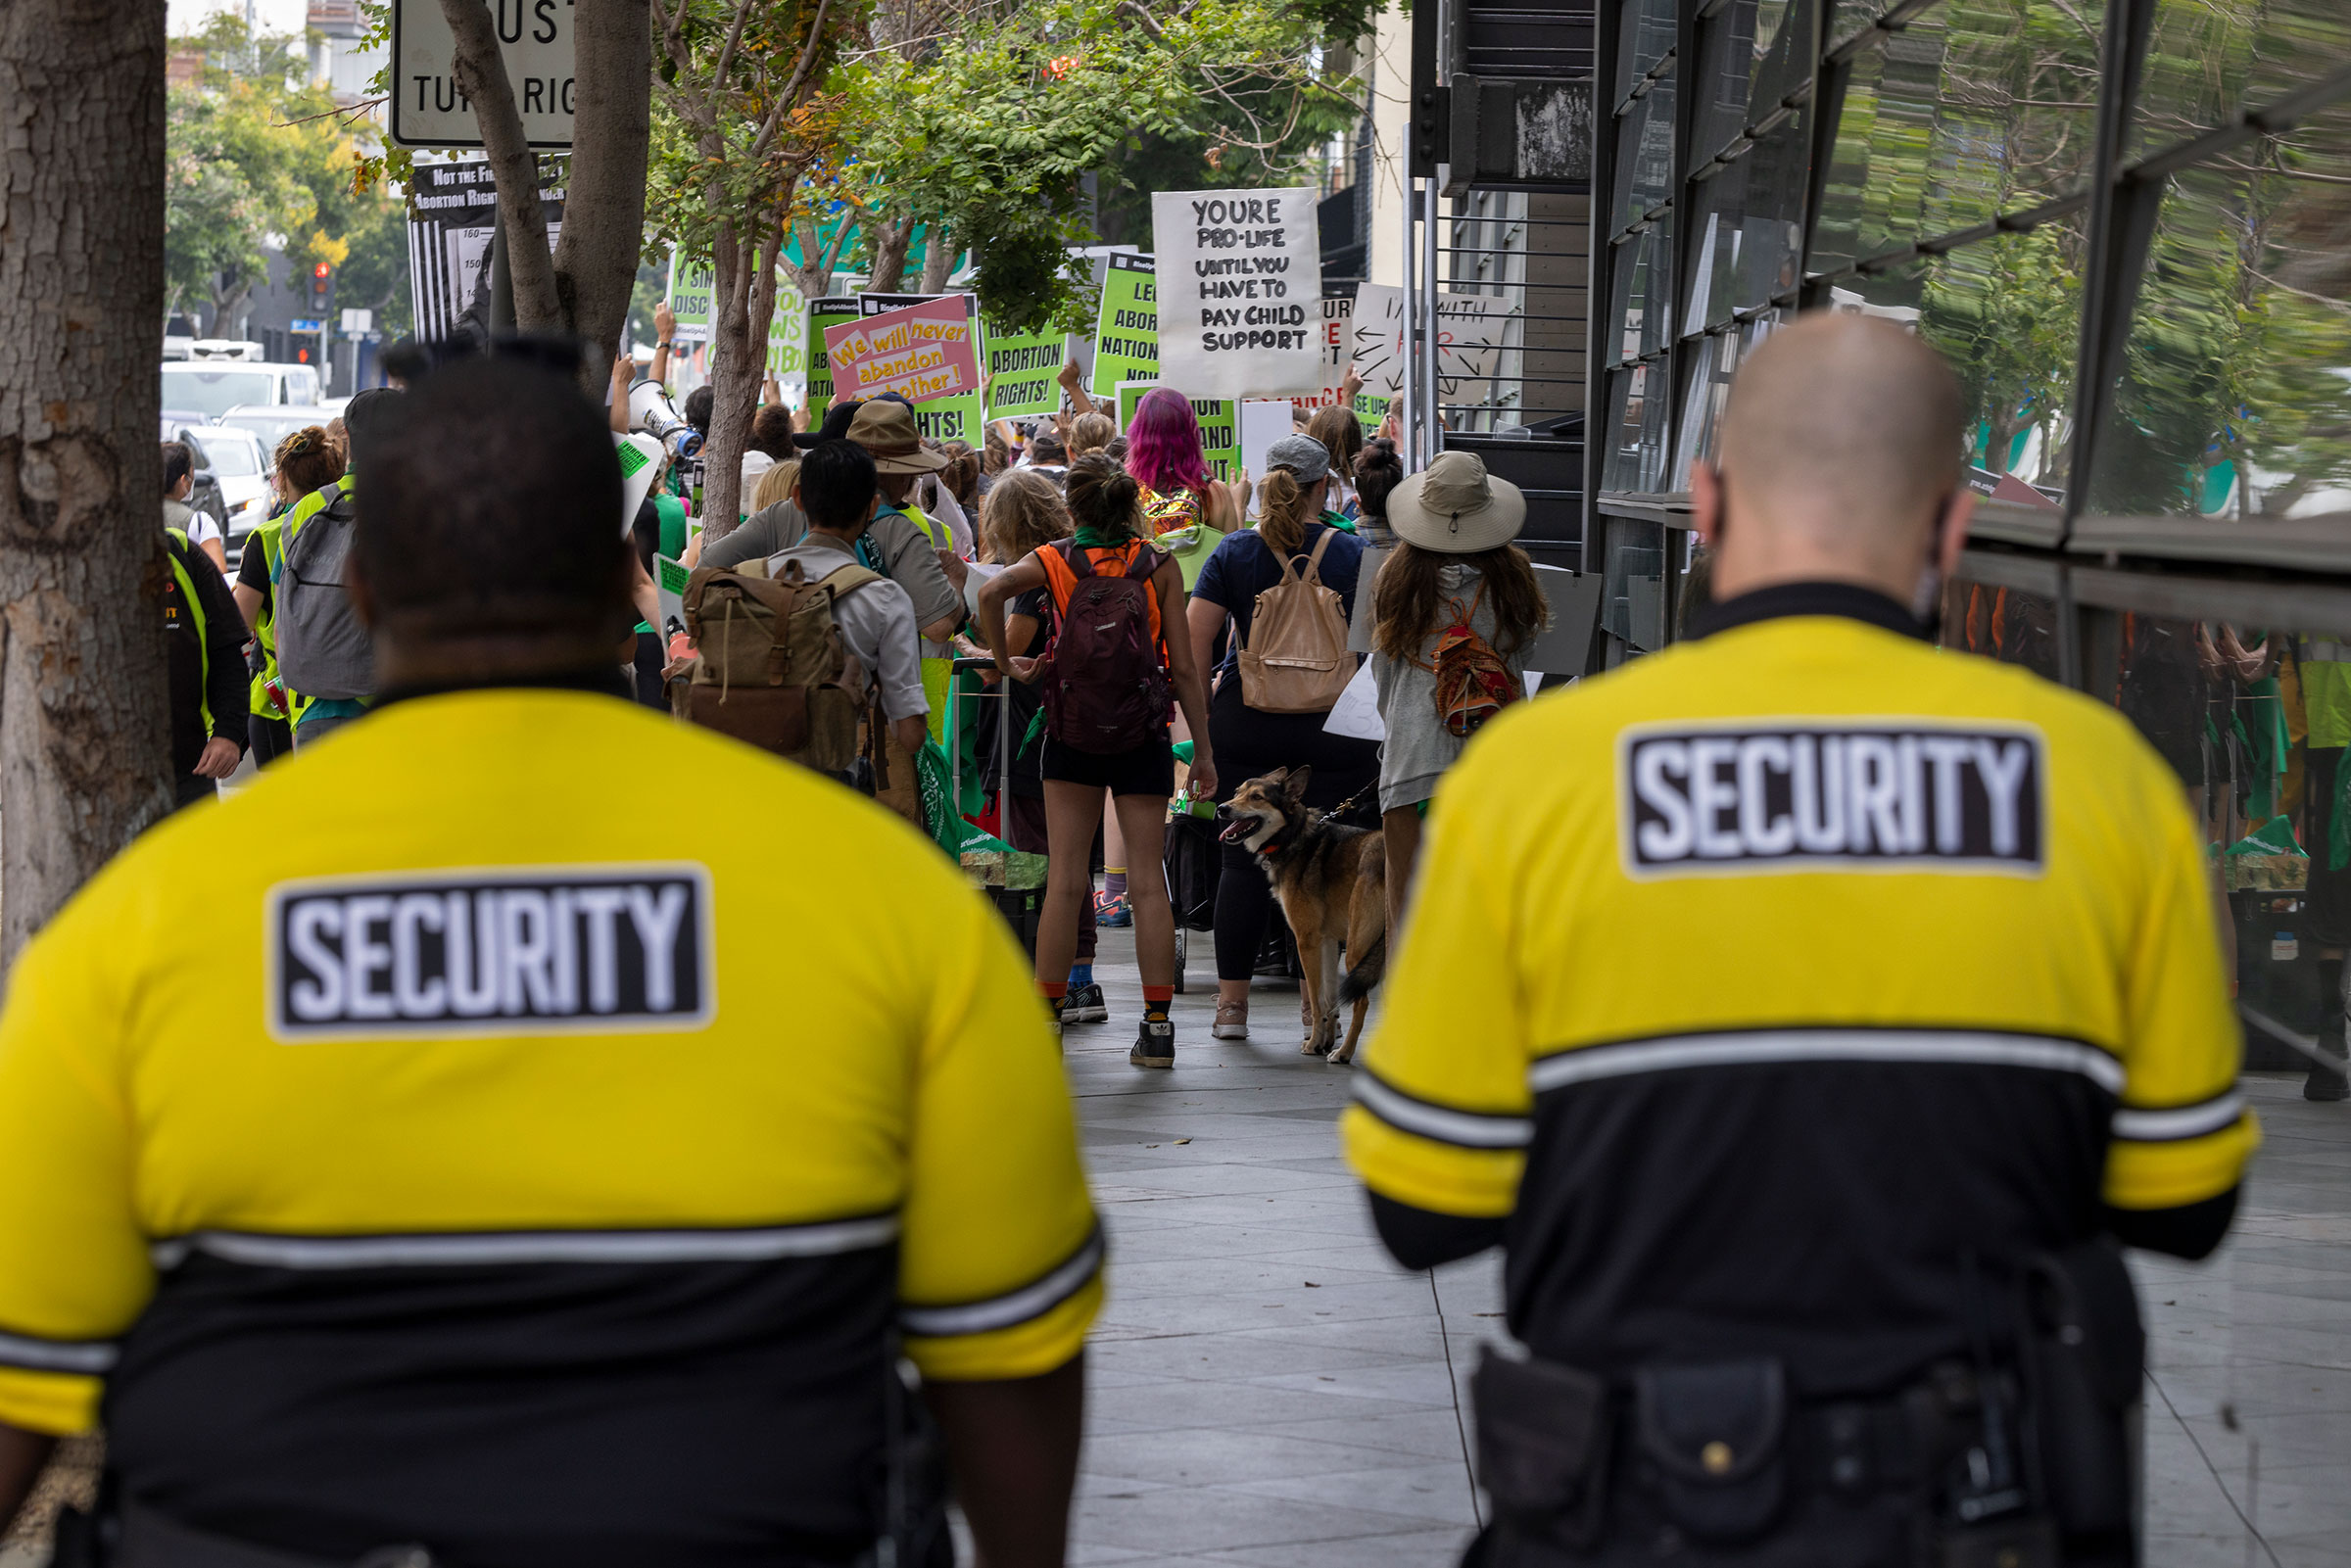 Private security guards follow behind protesters marching to a Planned Parenthood office to denounce the US Supreme Court decision to end abortion rights protections in Santa Monica, Calif. on July 16, 2022. (David McNew—Getty Images)